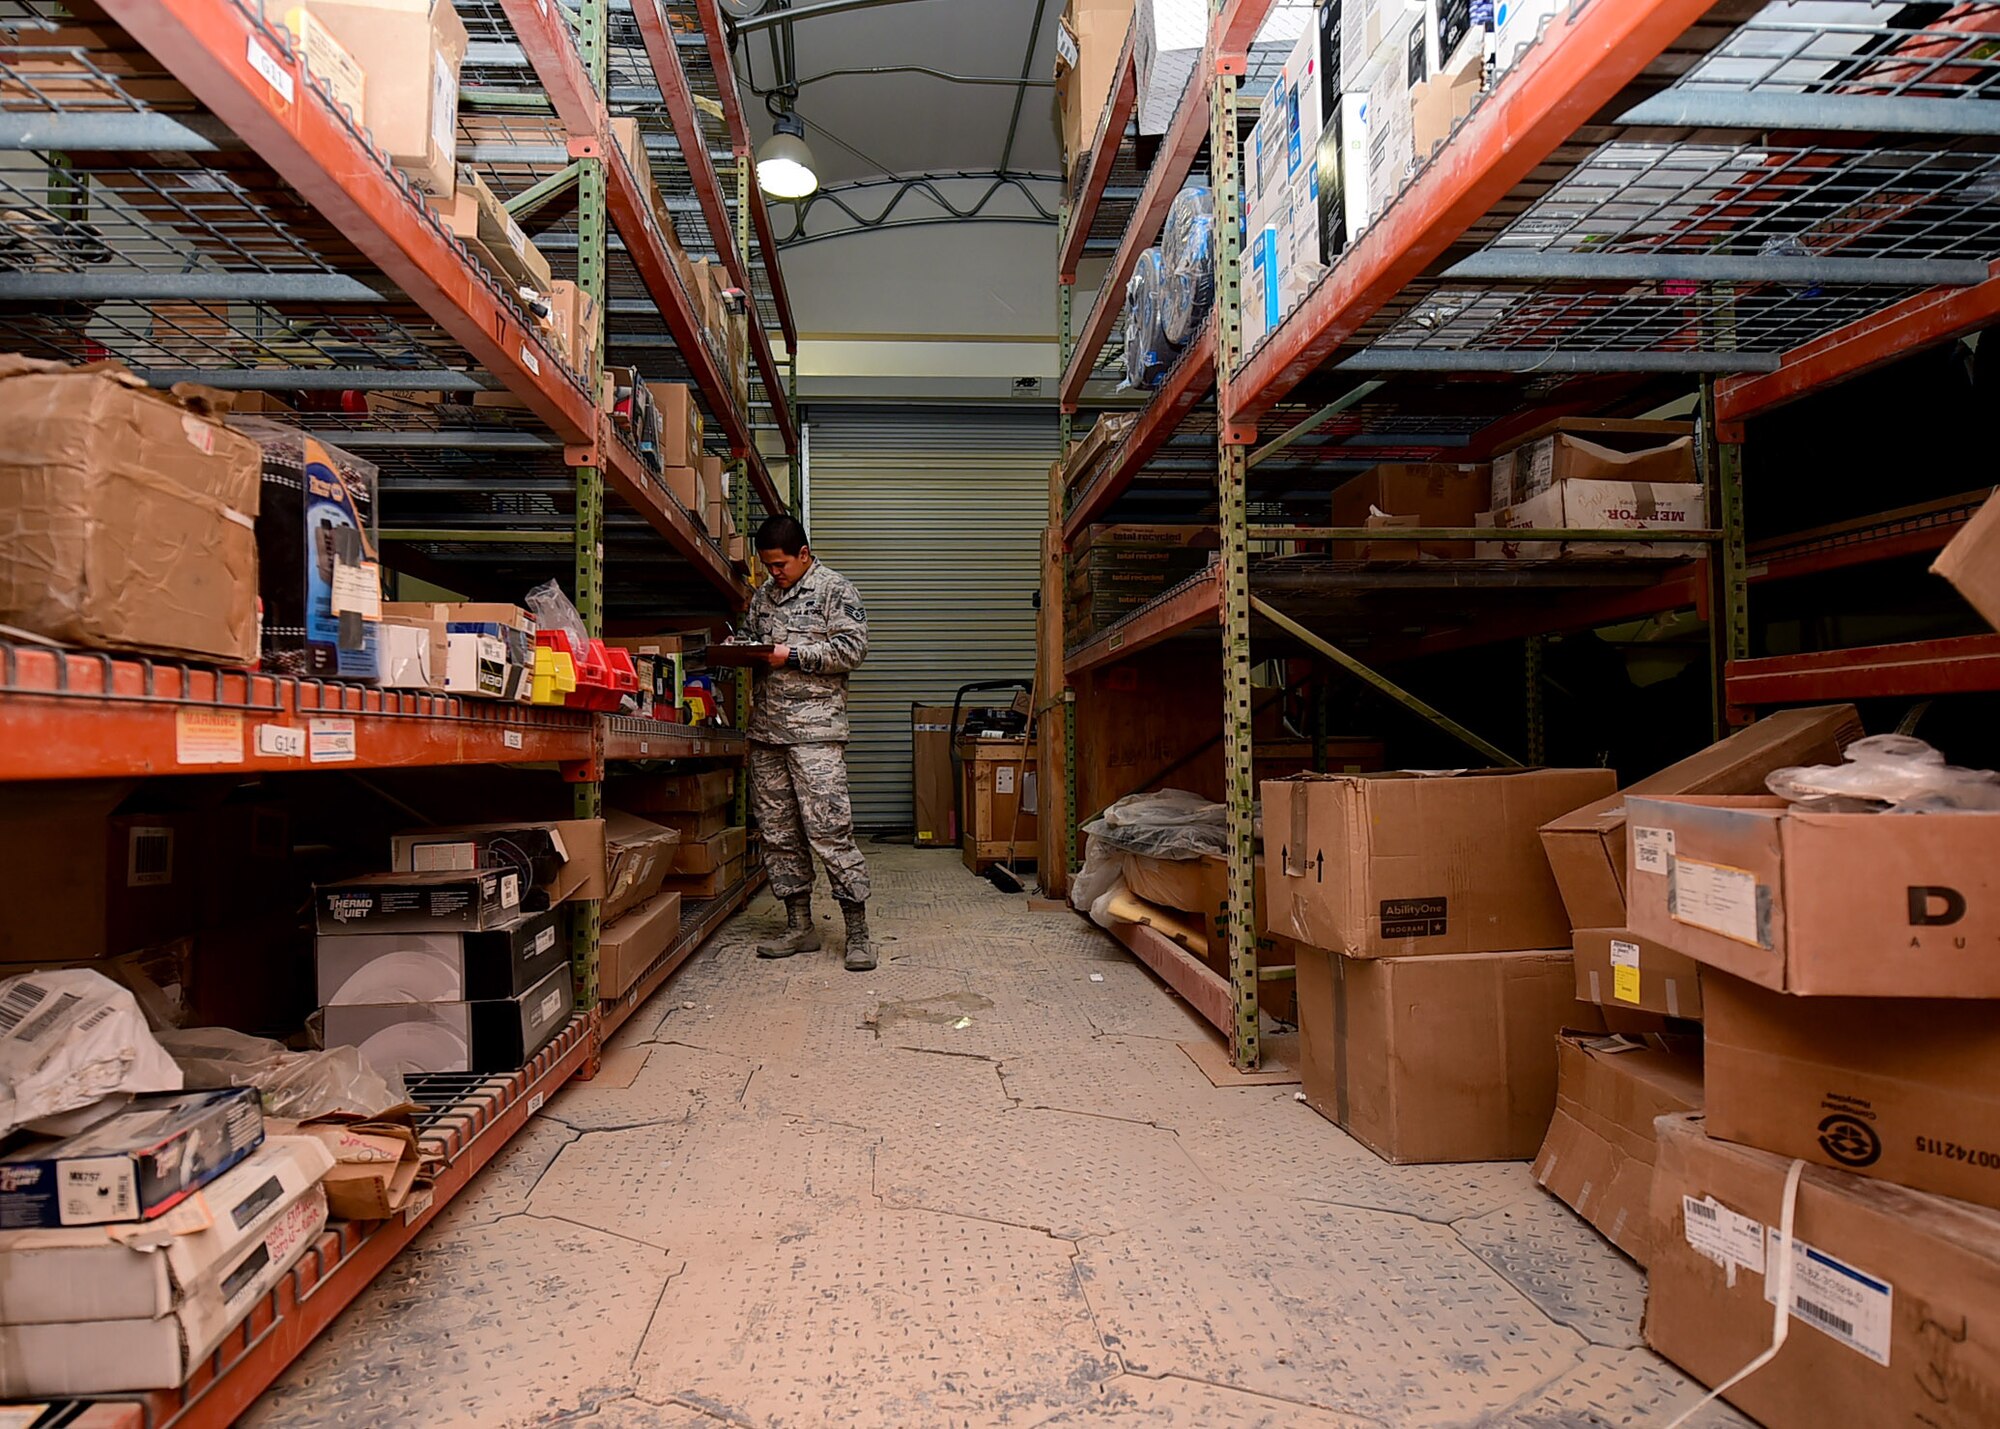 Staff Sgt. Jennifer Panican, 386th Expeditionary Logistics Readiness Squadron materiel control NCO in charge, conducts a parts inventory at an undisclosed location in Southwest Asia, Jan. 4, 2016. The material management flight purchases, maintains and tracks all vehicle parts necessary to maintain the fleet supporting Operation INHERENT RESOLVE. (U.S. Air Force photo by Staff Sgt. Jerilyn Quintanilla)